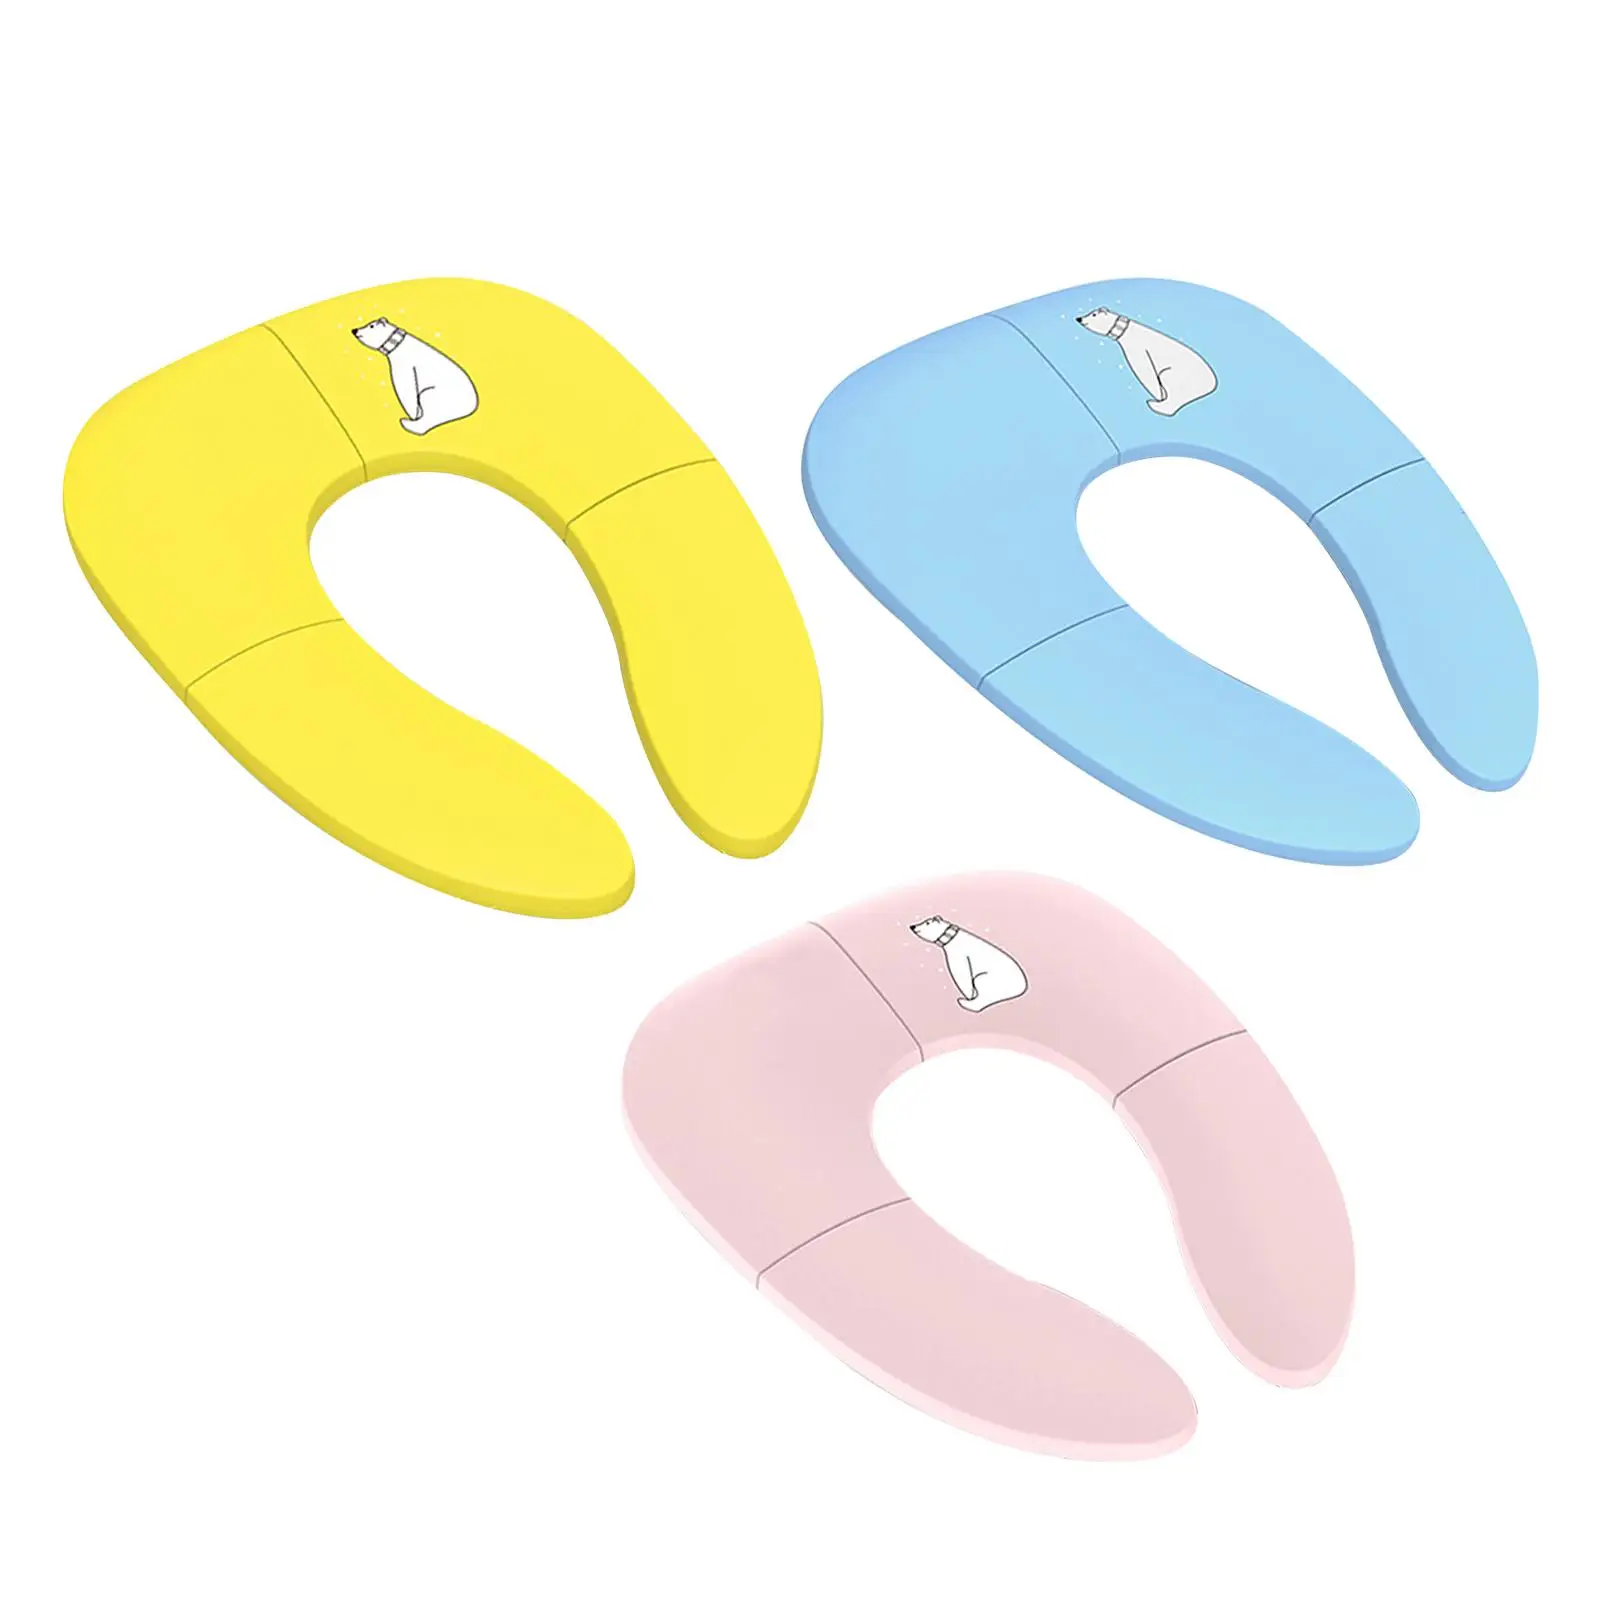 Toilet Seat pad Non Slip Reusable for Round and Oval Toilets Kids Boys